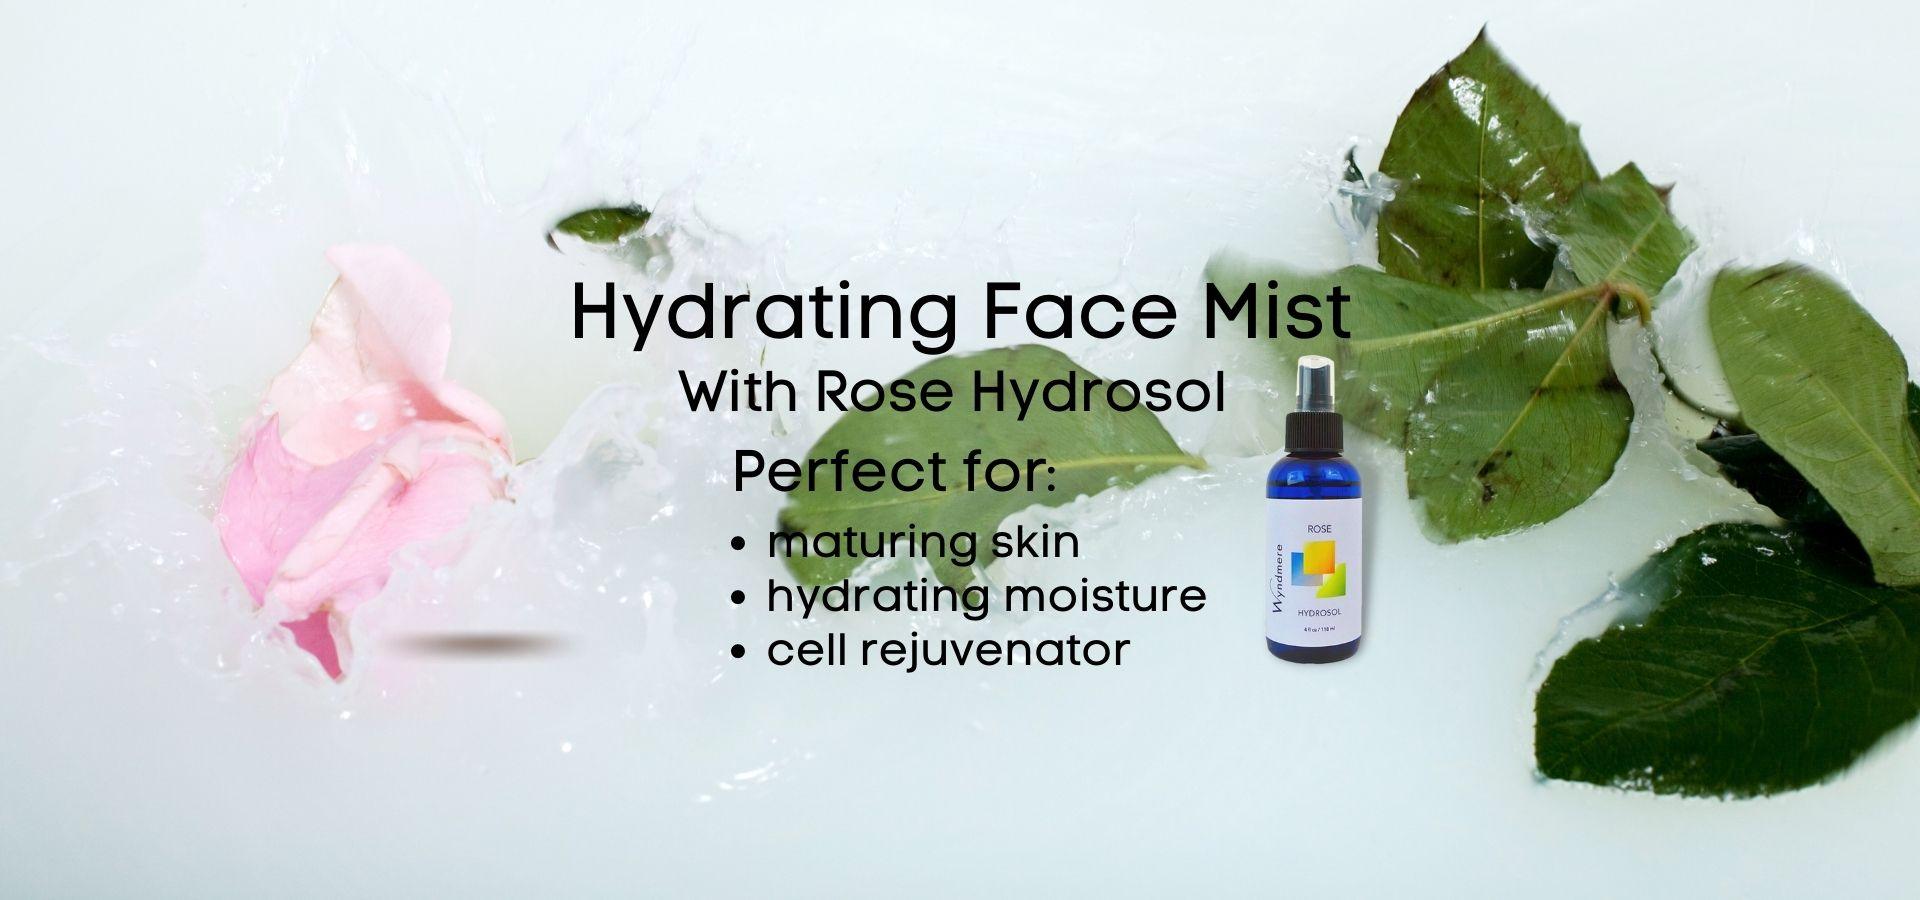 Hydrating face mist recipe with Rose hydrosol, Lavender, and Geranium essential oils